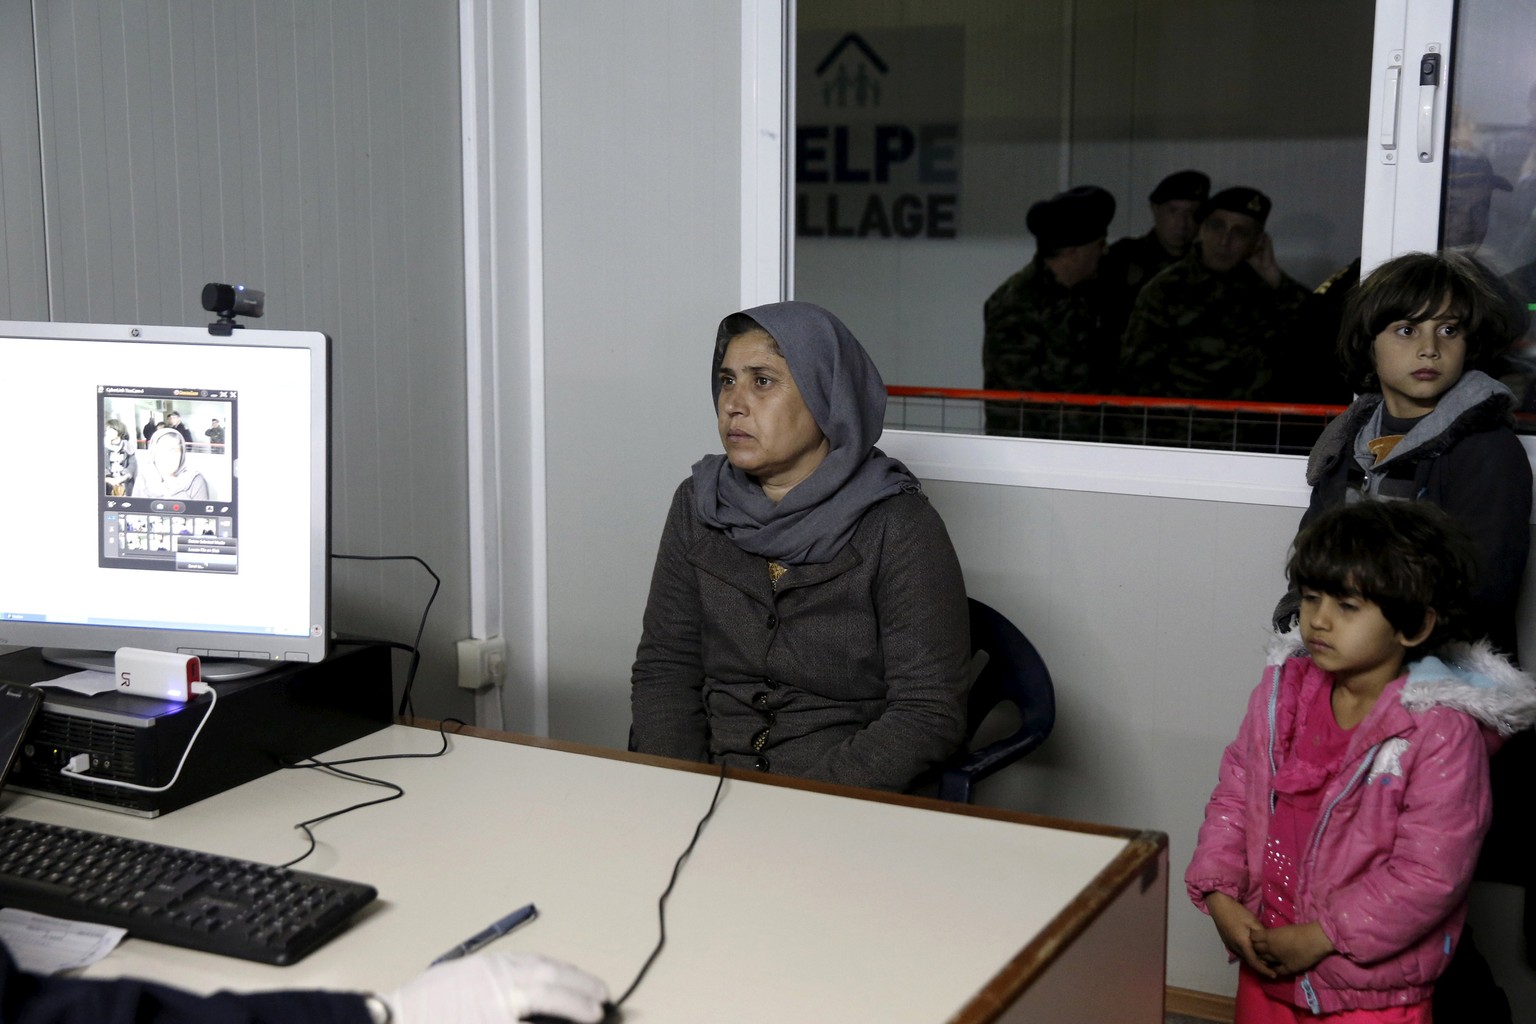 A Syrian refugee and her children are registered at the migrant registration centre on the Greek island of Chios, February 16, 2016. REUTERS/Alkis Konstantinidis/File Photo